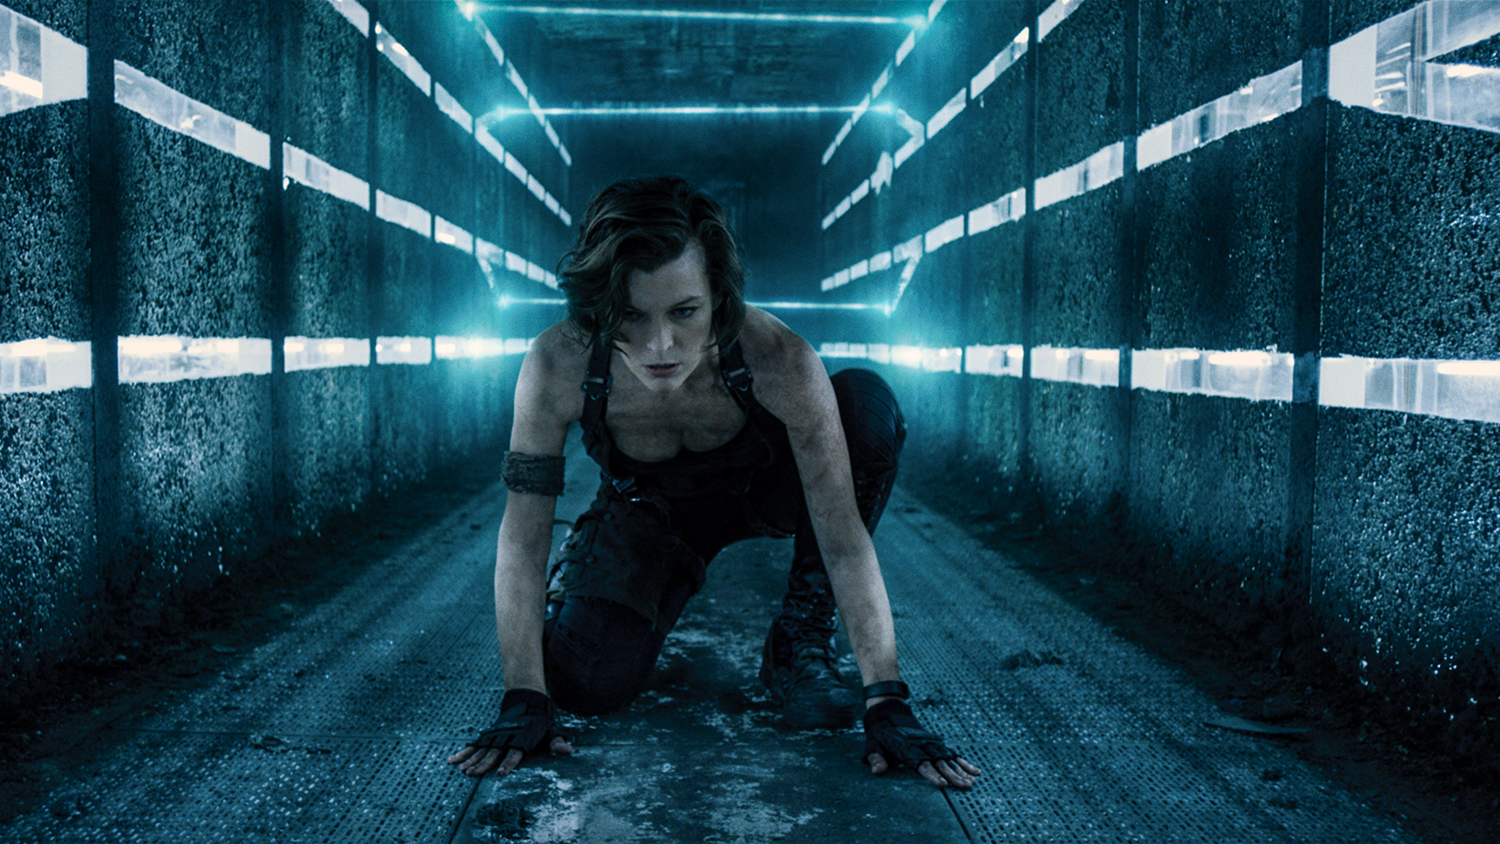 The Resident Evil Movie Franchise Is Getting Rebooted